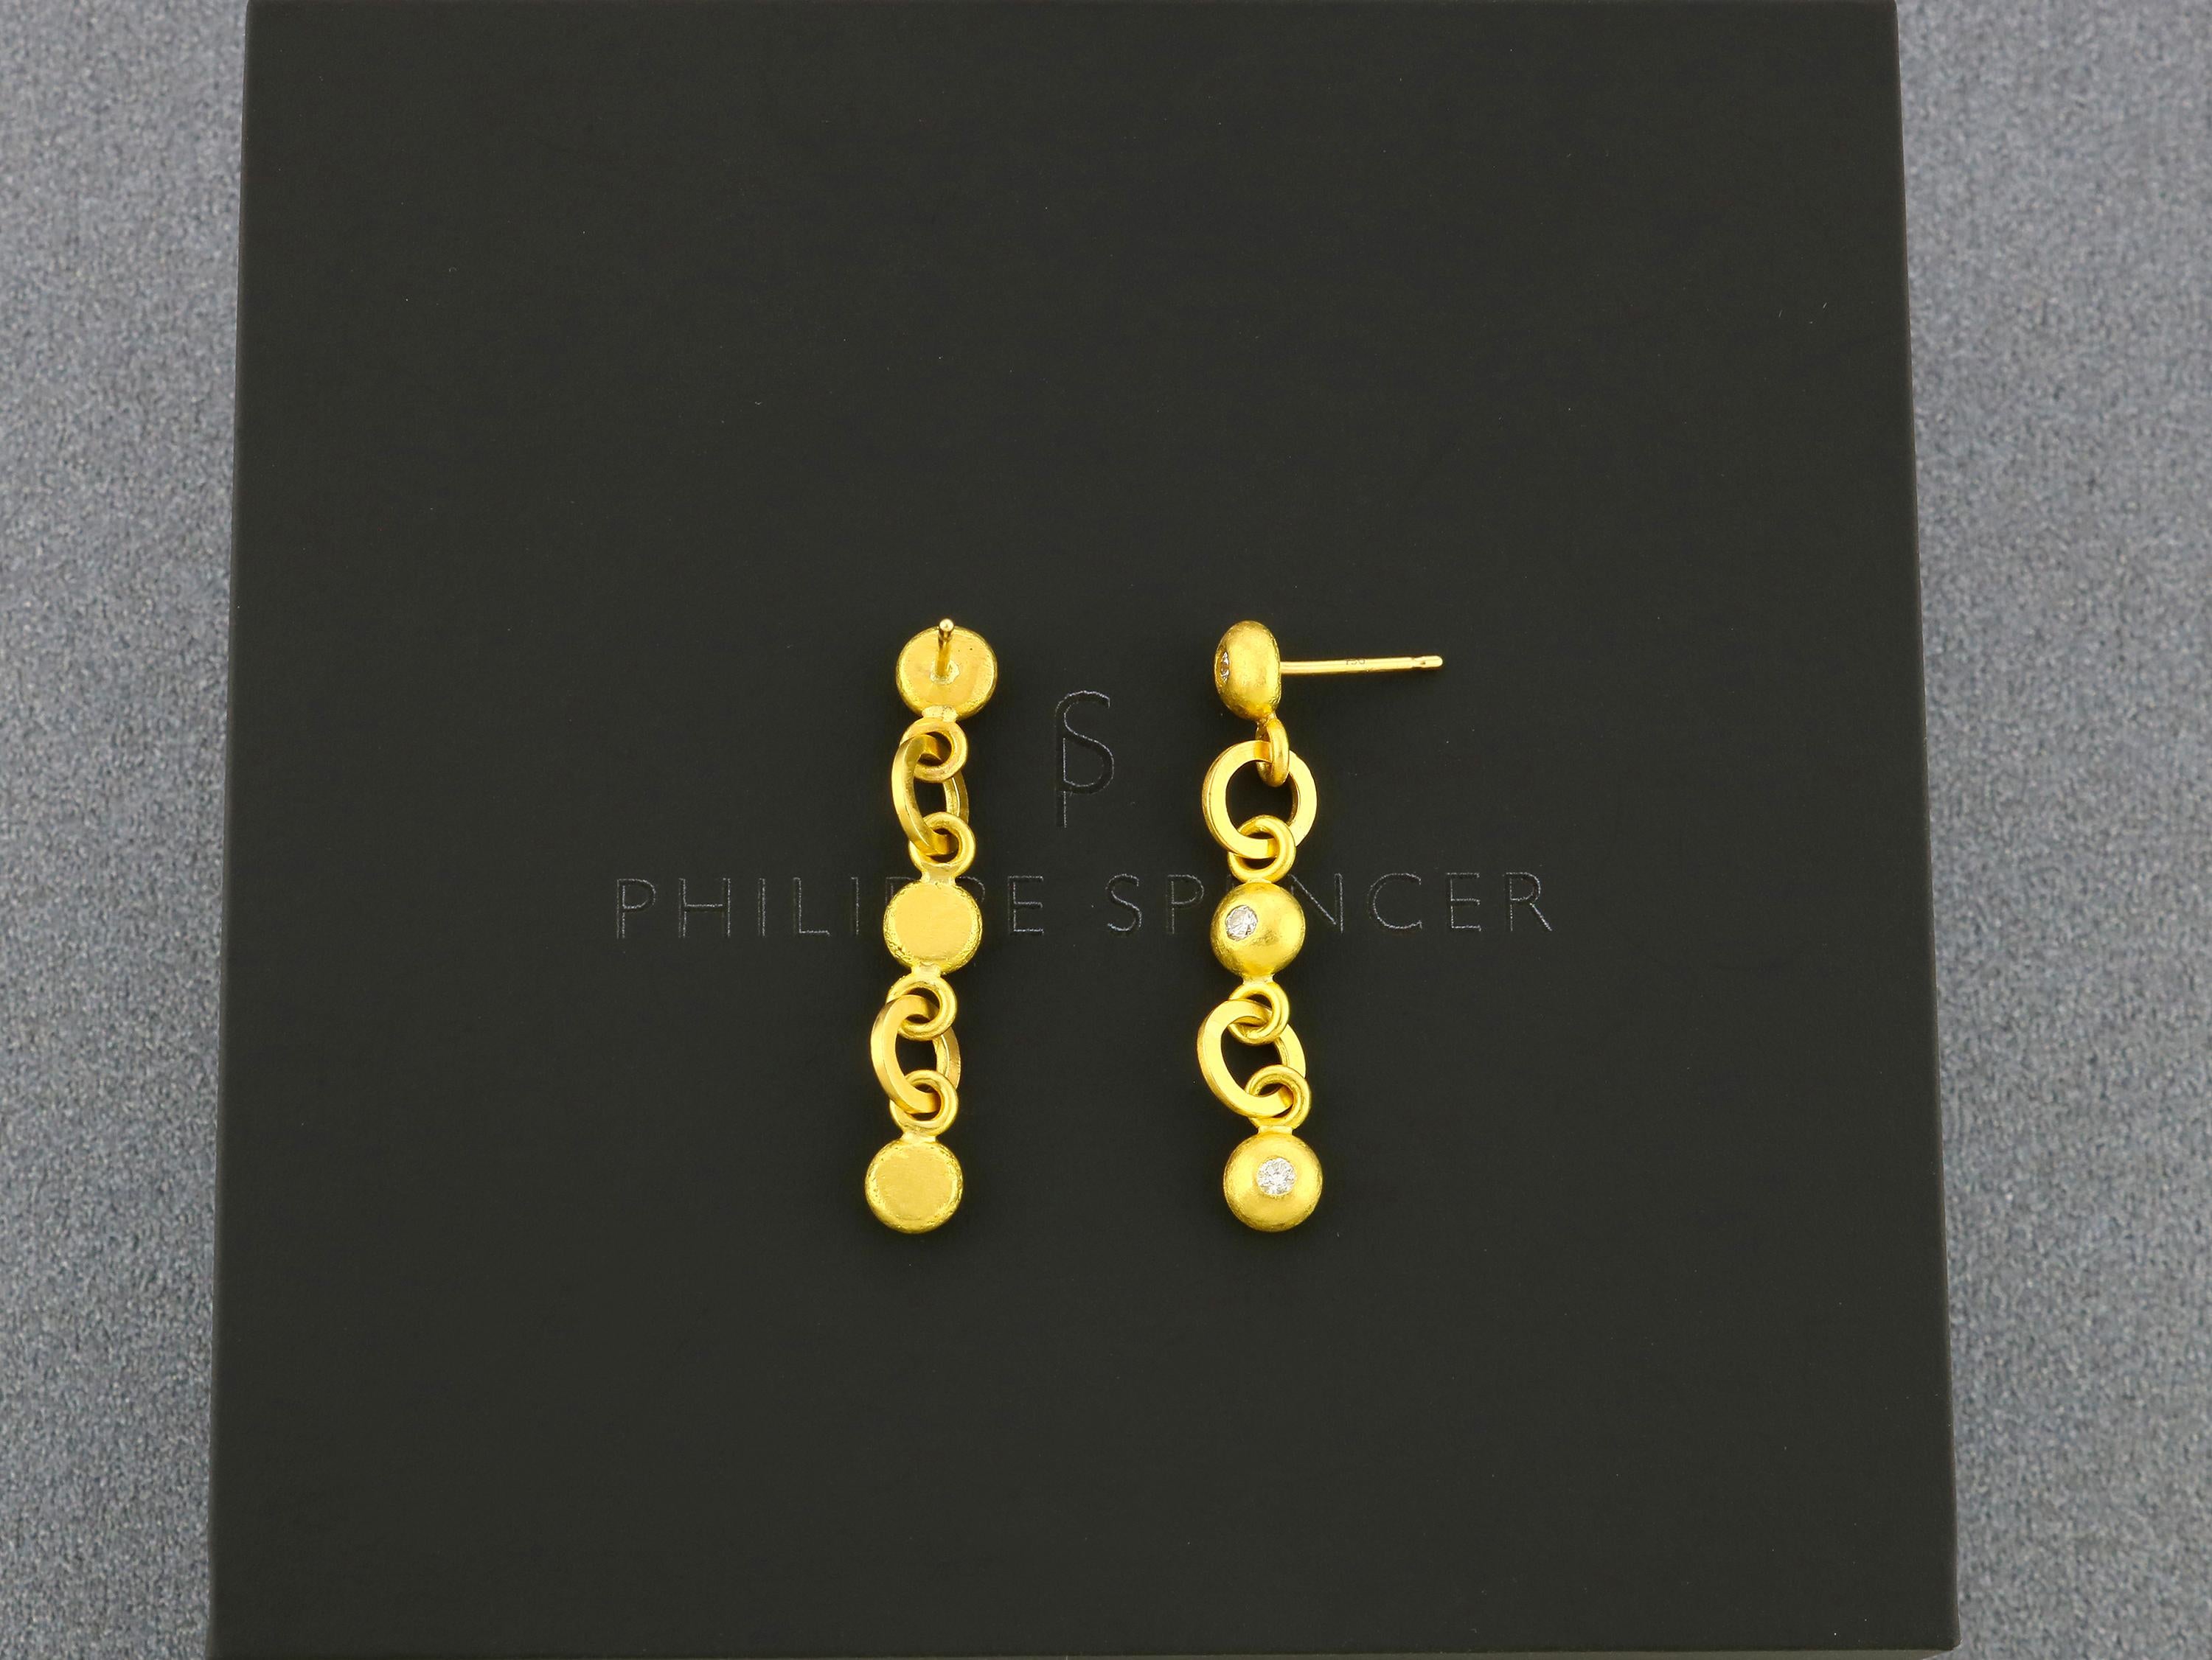 PHILIPPE SPENCER - 1/3 Ct. Total COLORLESS (D-F) Diamond Three Drop Dangling Earrings set in Pure 20K Gold, with Solid 20K Gold connection links. Each pair is a unique, authentically smithed One-Of-A-Kind work of art. 

These beautiful Hand-Forged